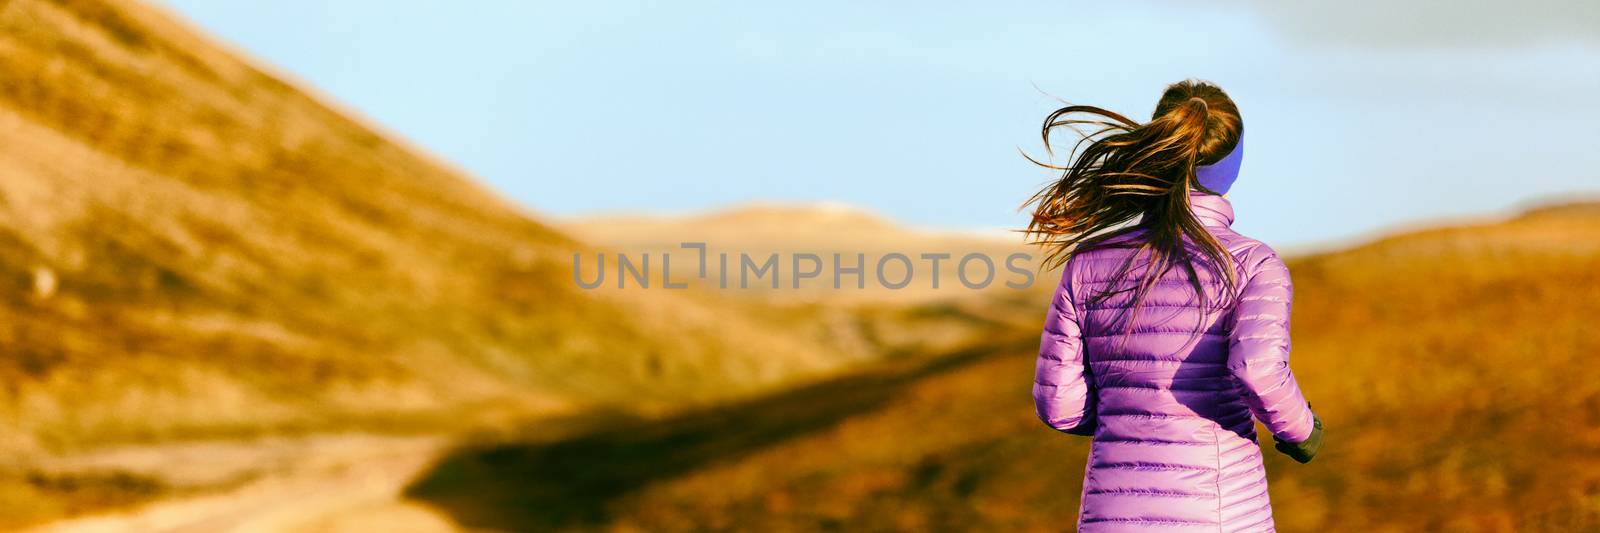 Running woman in autumn foliage background. Athlete runner on trail run outdoors panoramic banner. Active person jogging in down jacket from behind. by Maridav